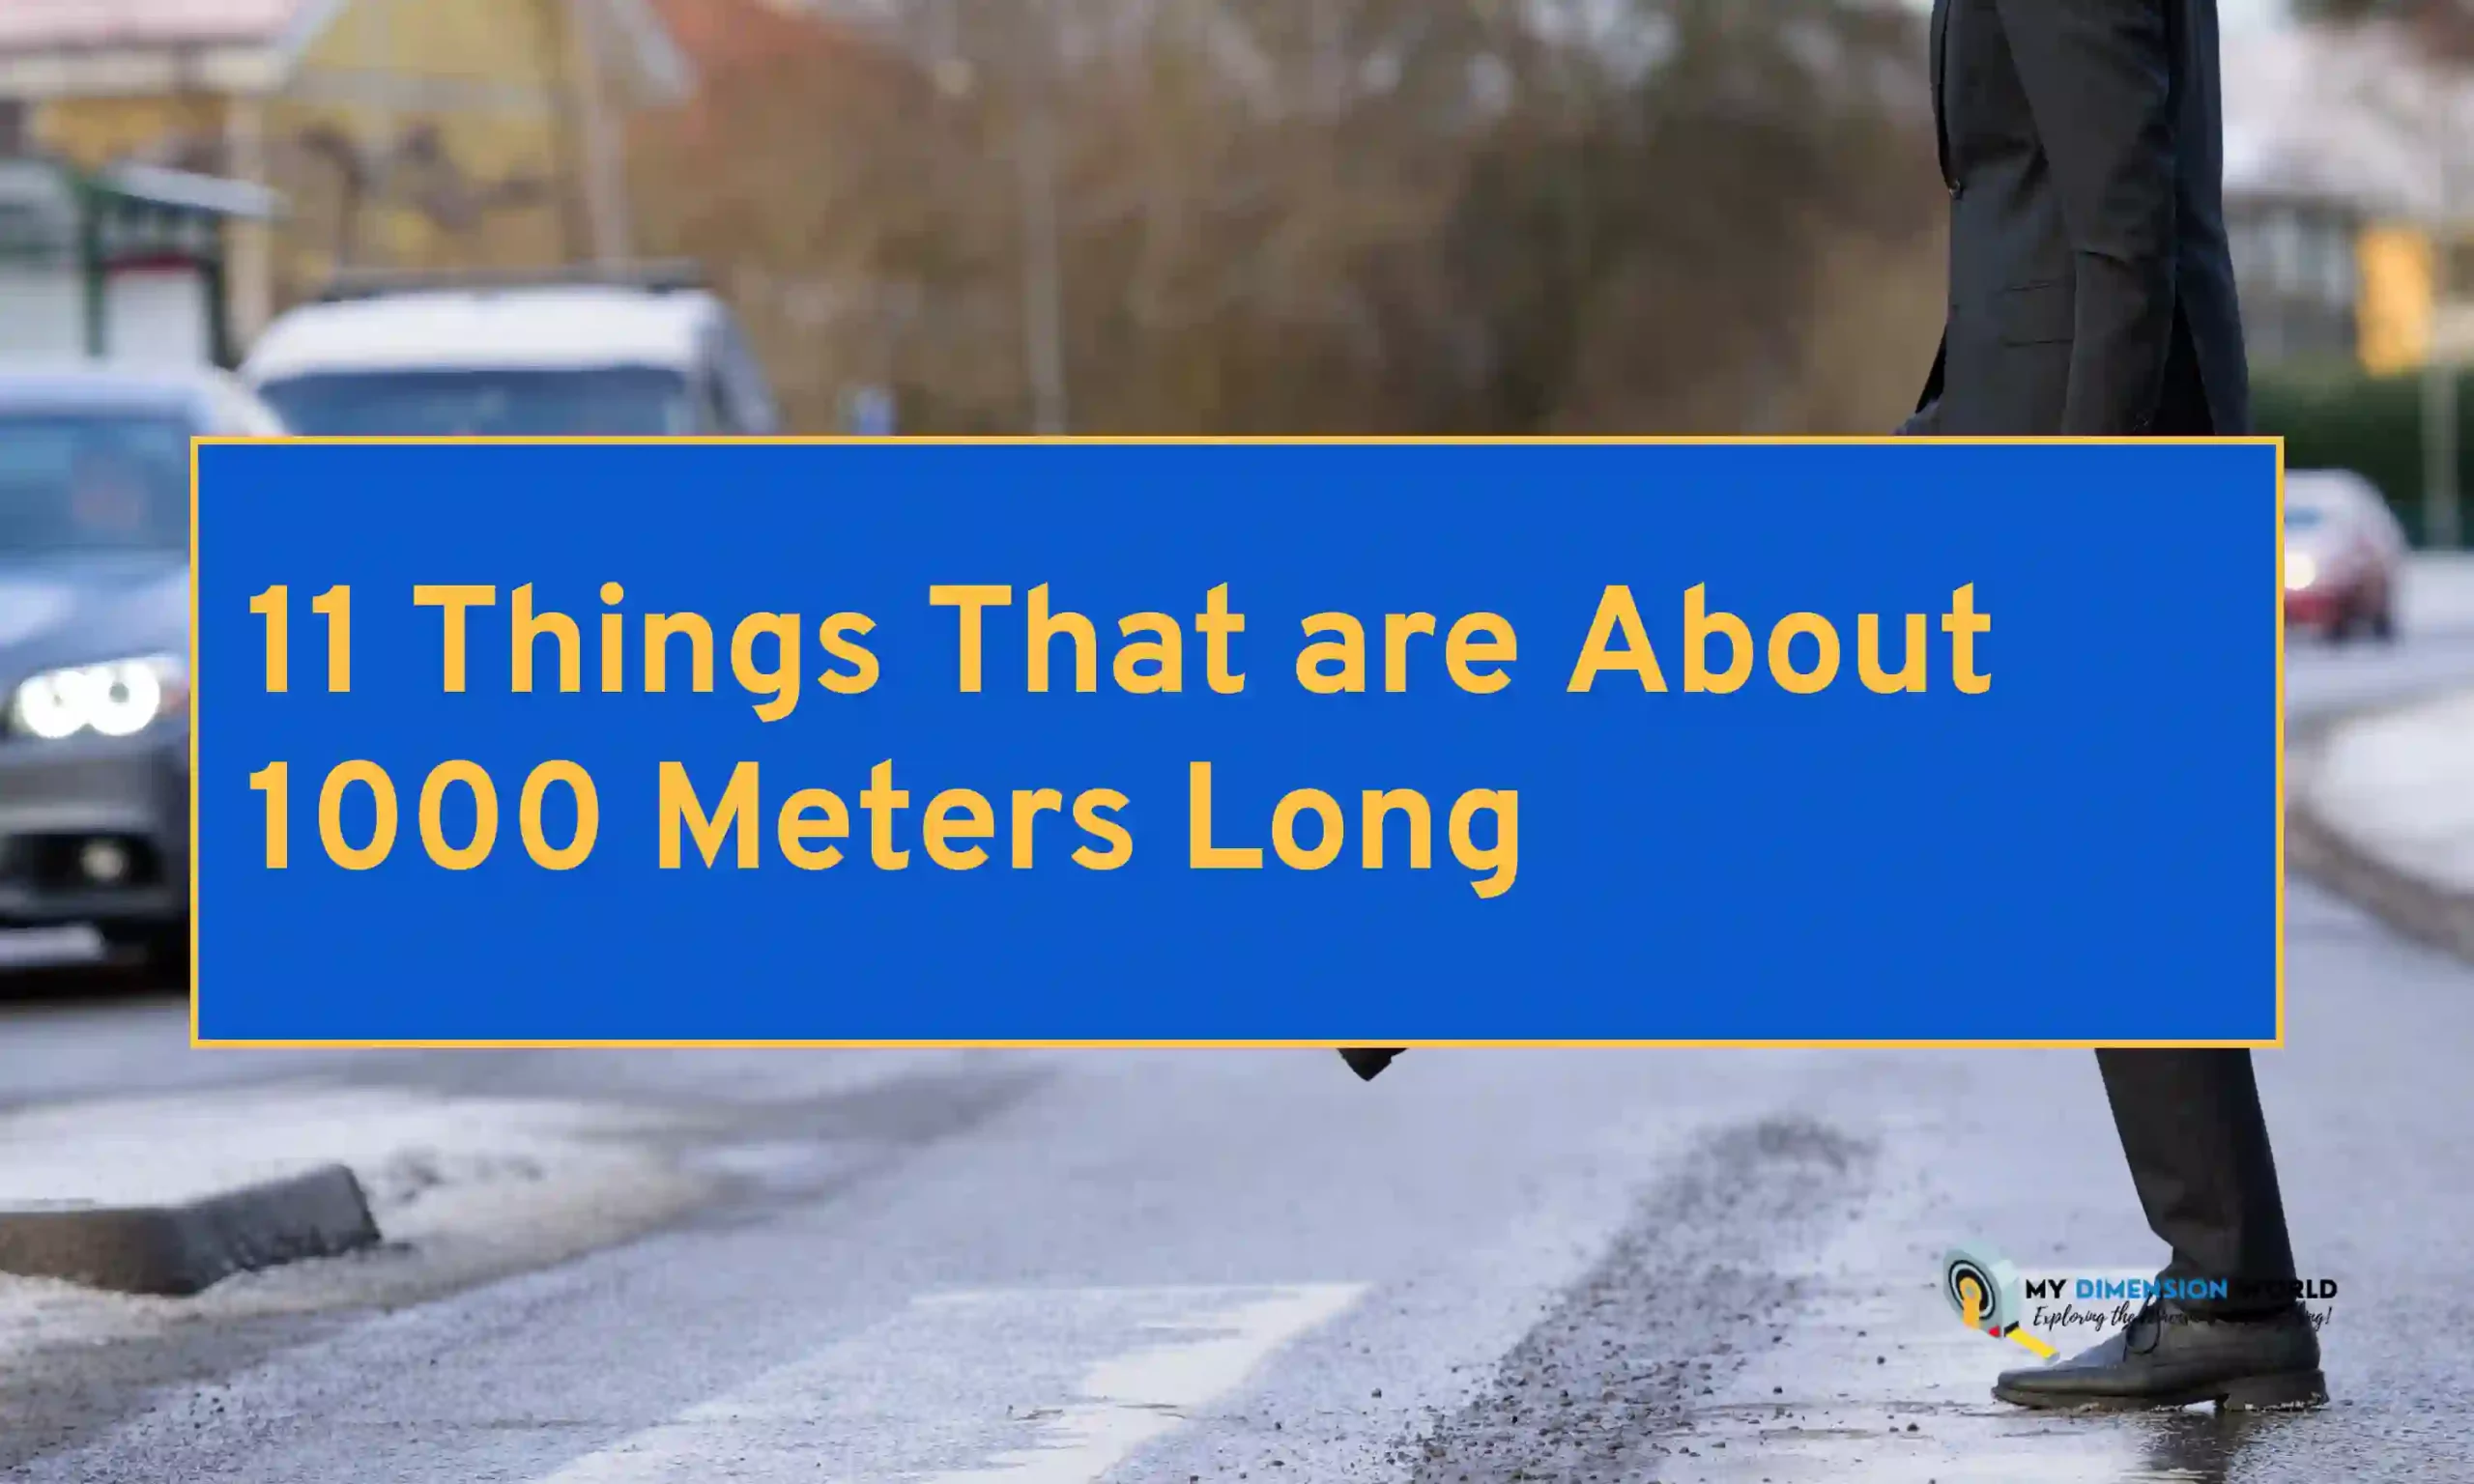 11 Things That are About 1000 Meters Long